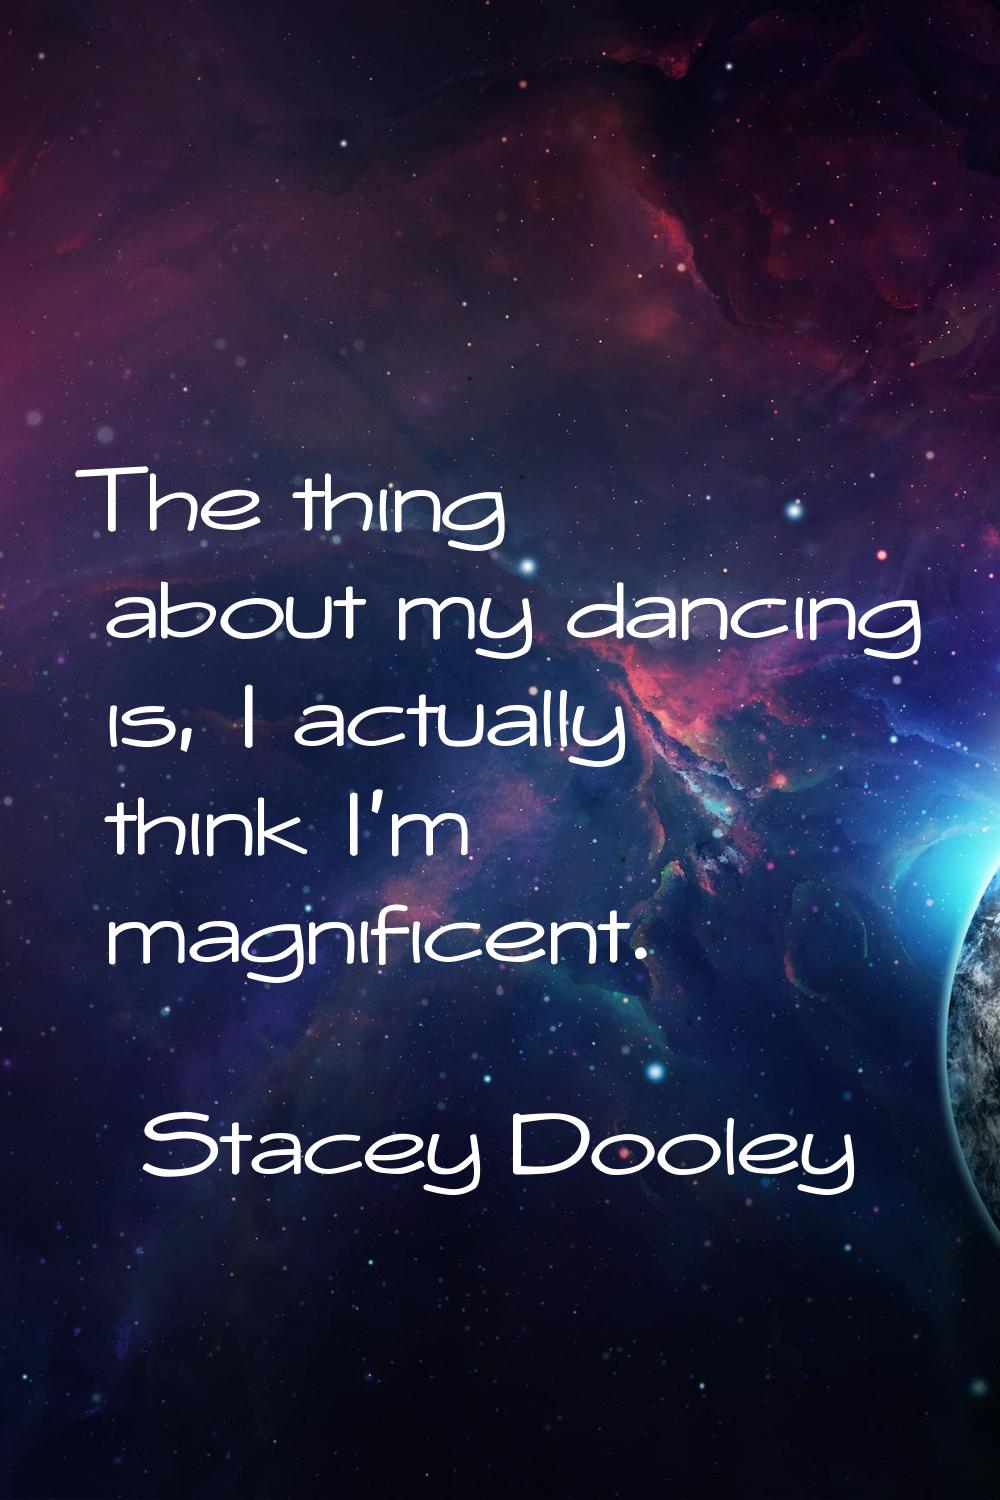 The thing about my dancing is, I actually think I'm magnificent.